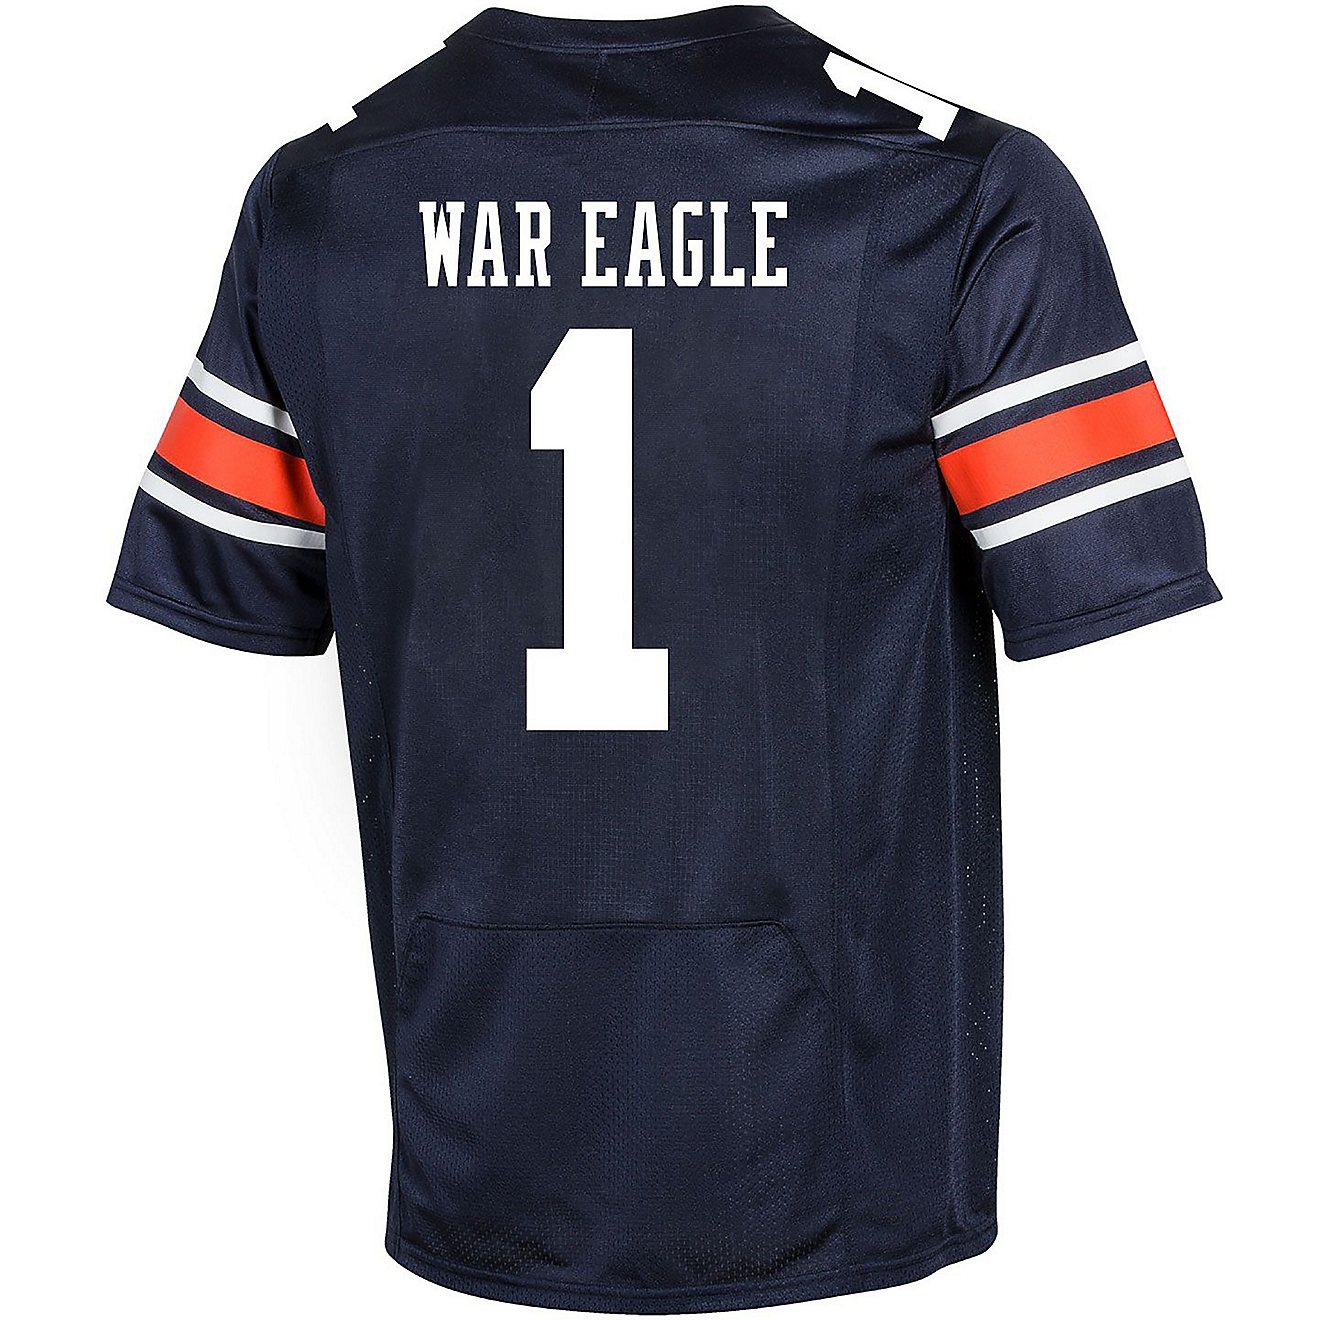 Under Armour Youth Auburn University Replica Football Jersey                                                                     - view number 2